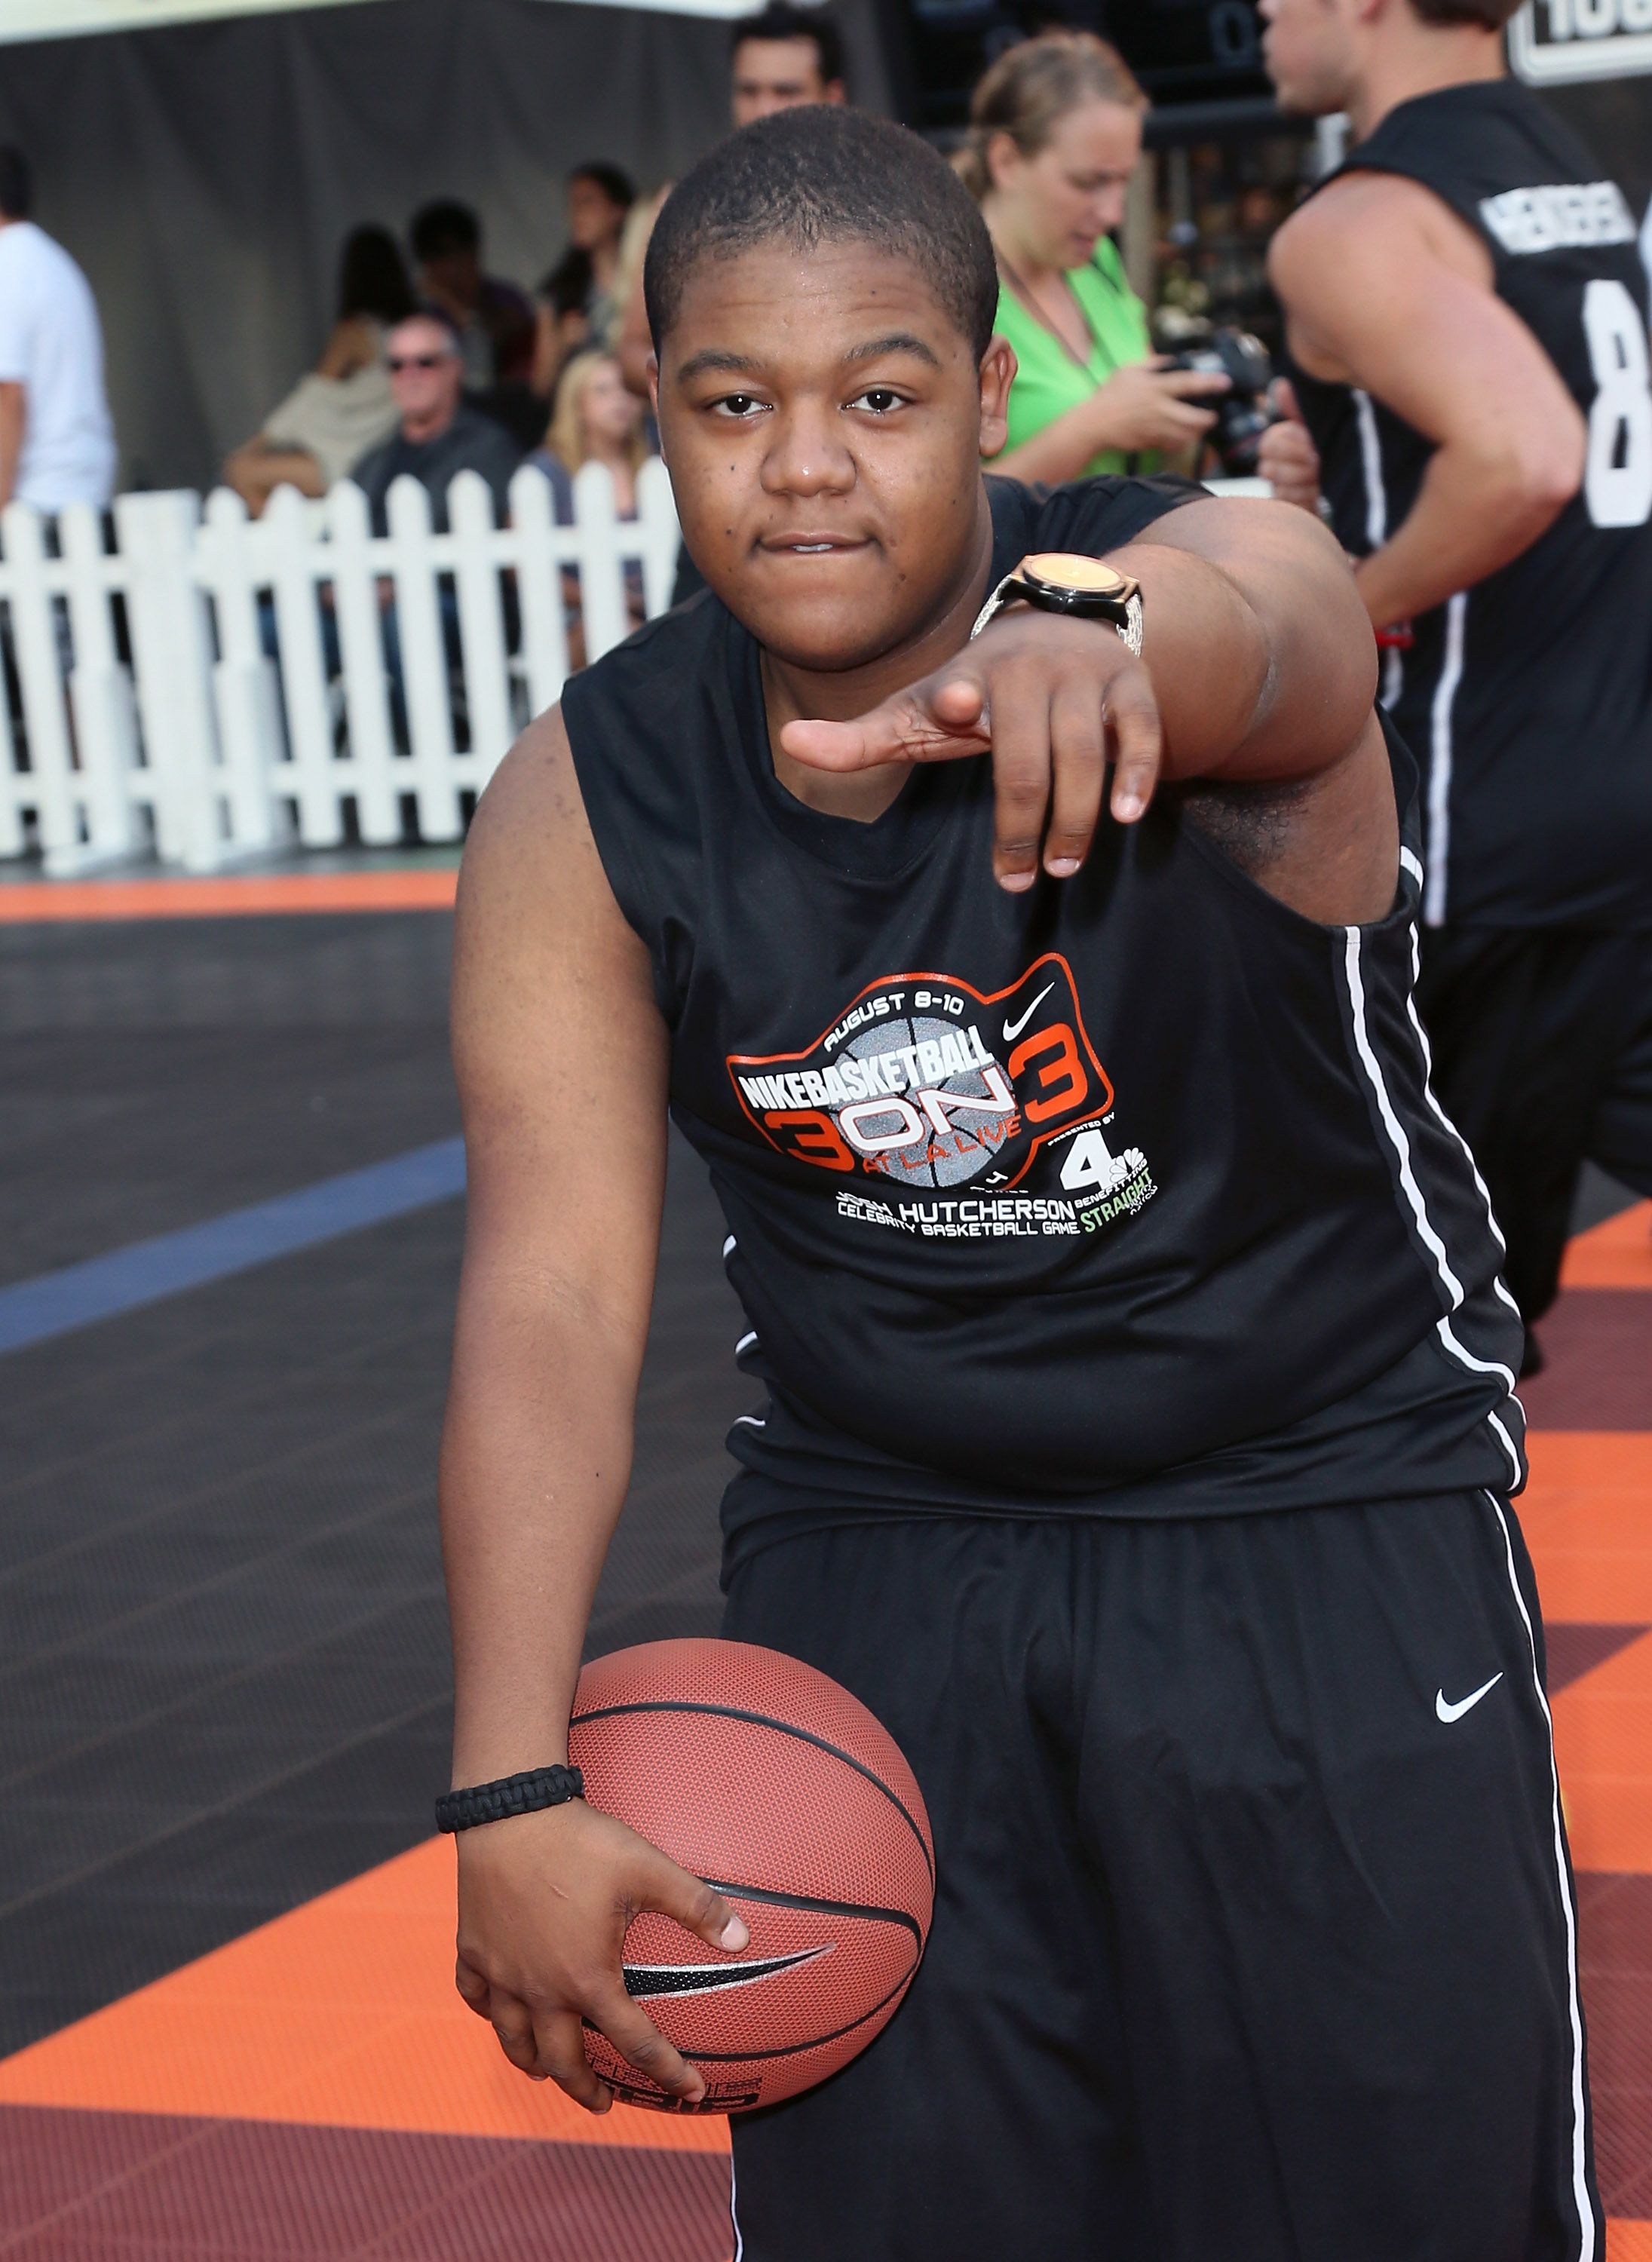 Kyle Massey attends the 3rd Annual Josh Hutcherson Celebrity Basketball Game at Nokia Plaza L.A. LIVE on August 8, 2014 in Los Angeles, California. | Source: Getty Images